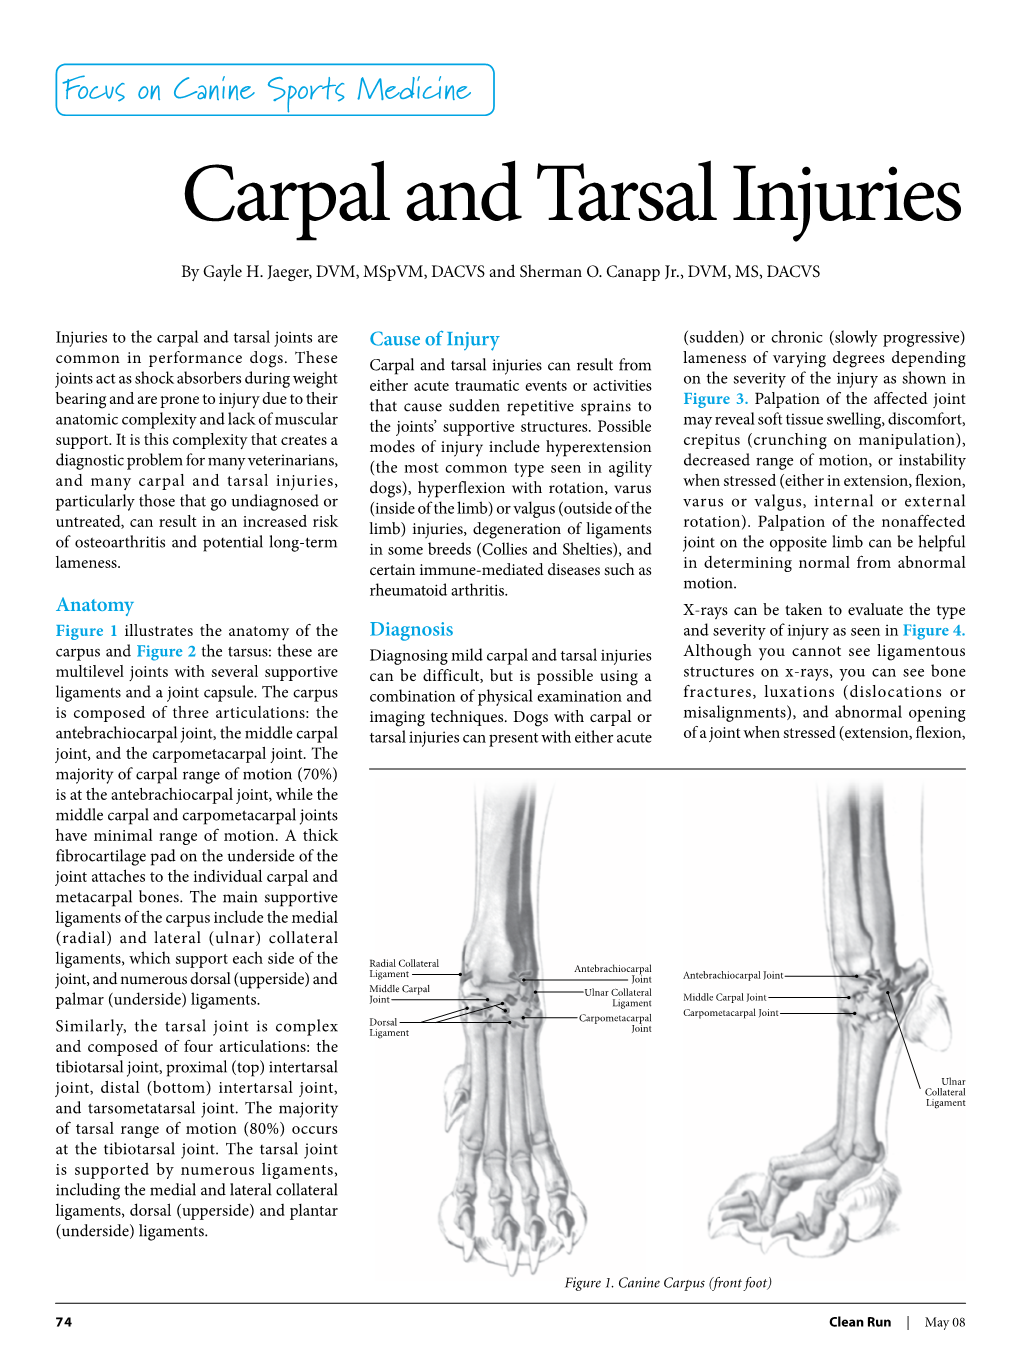 Carpal and Tarsal Injuries by Gayle H